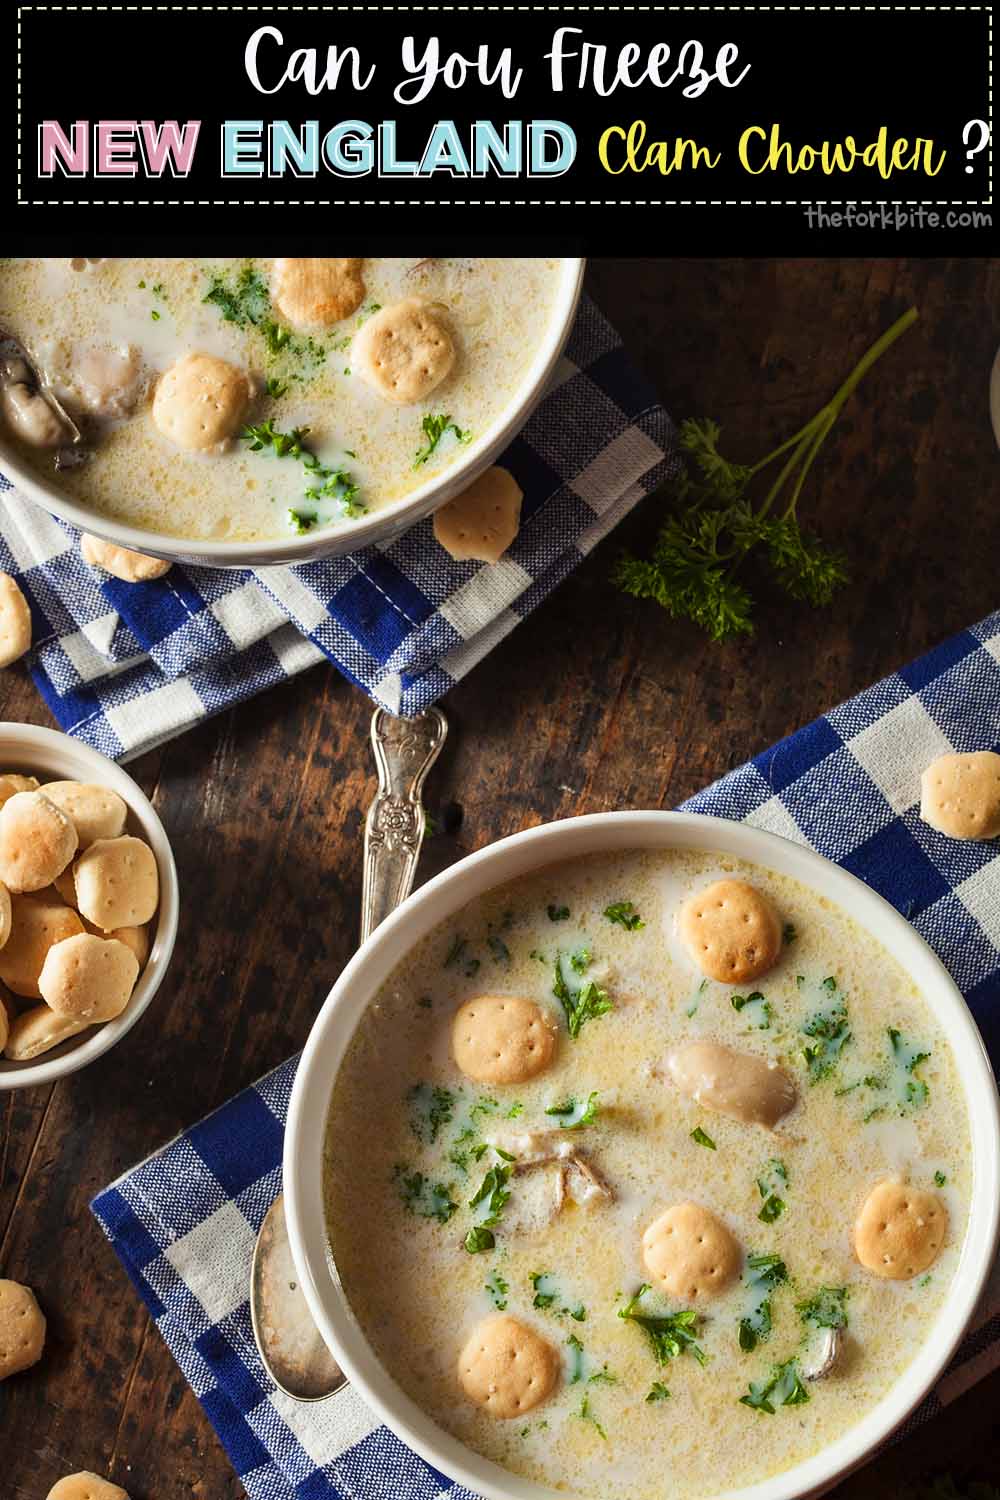 Yes, you freeze New England clam chowder. but there are provisos, and they usually depend on the ingredients used in the recipe.